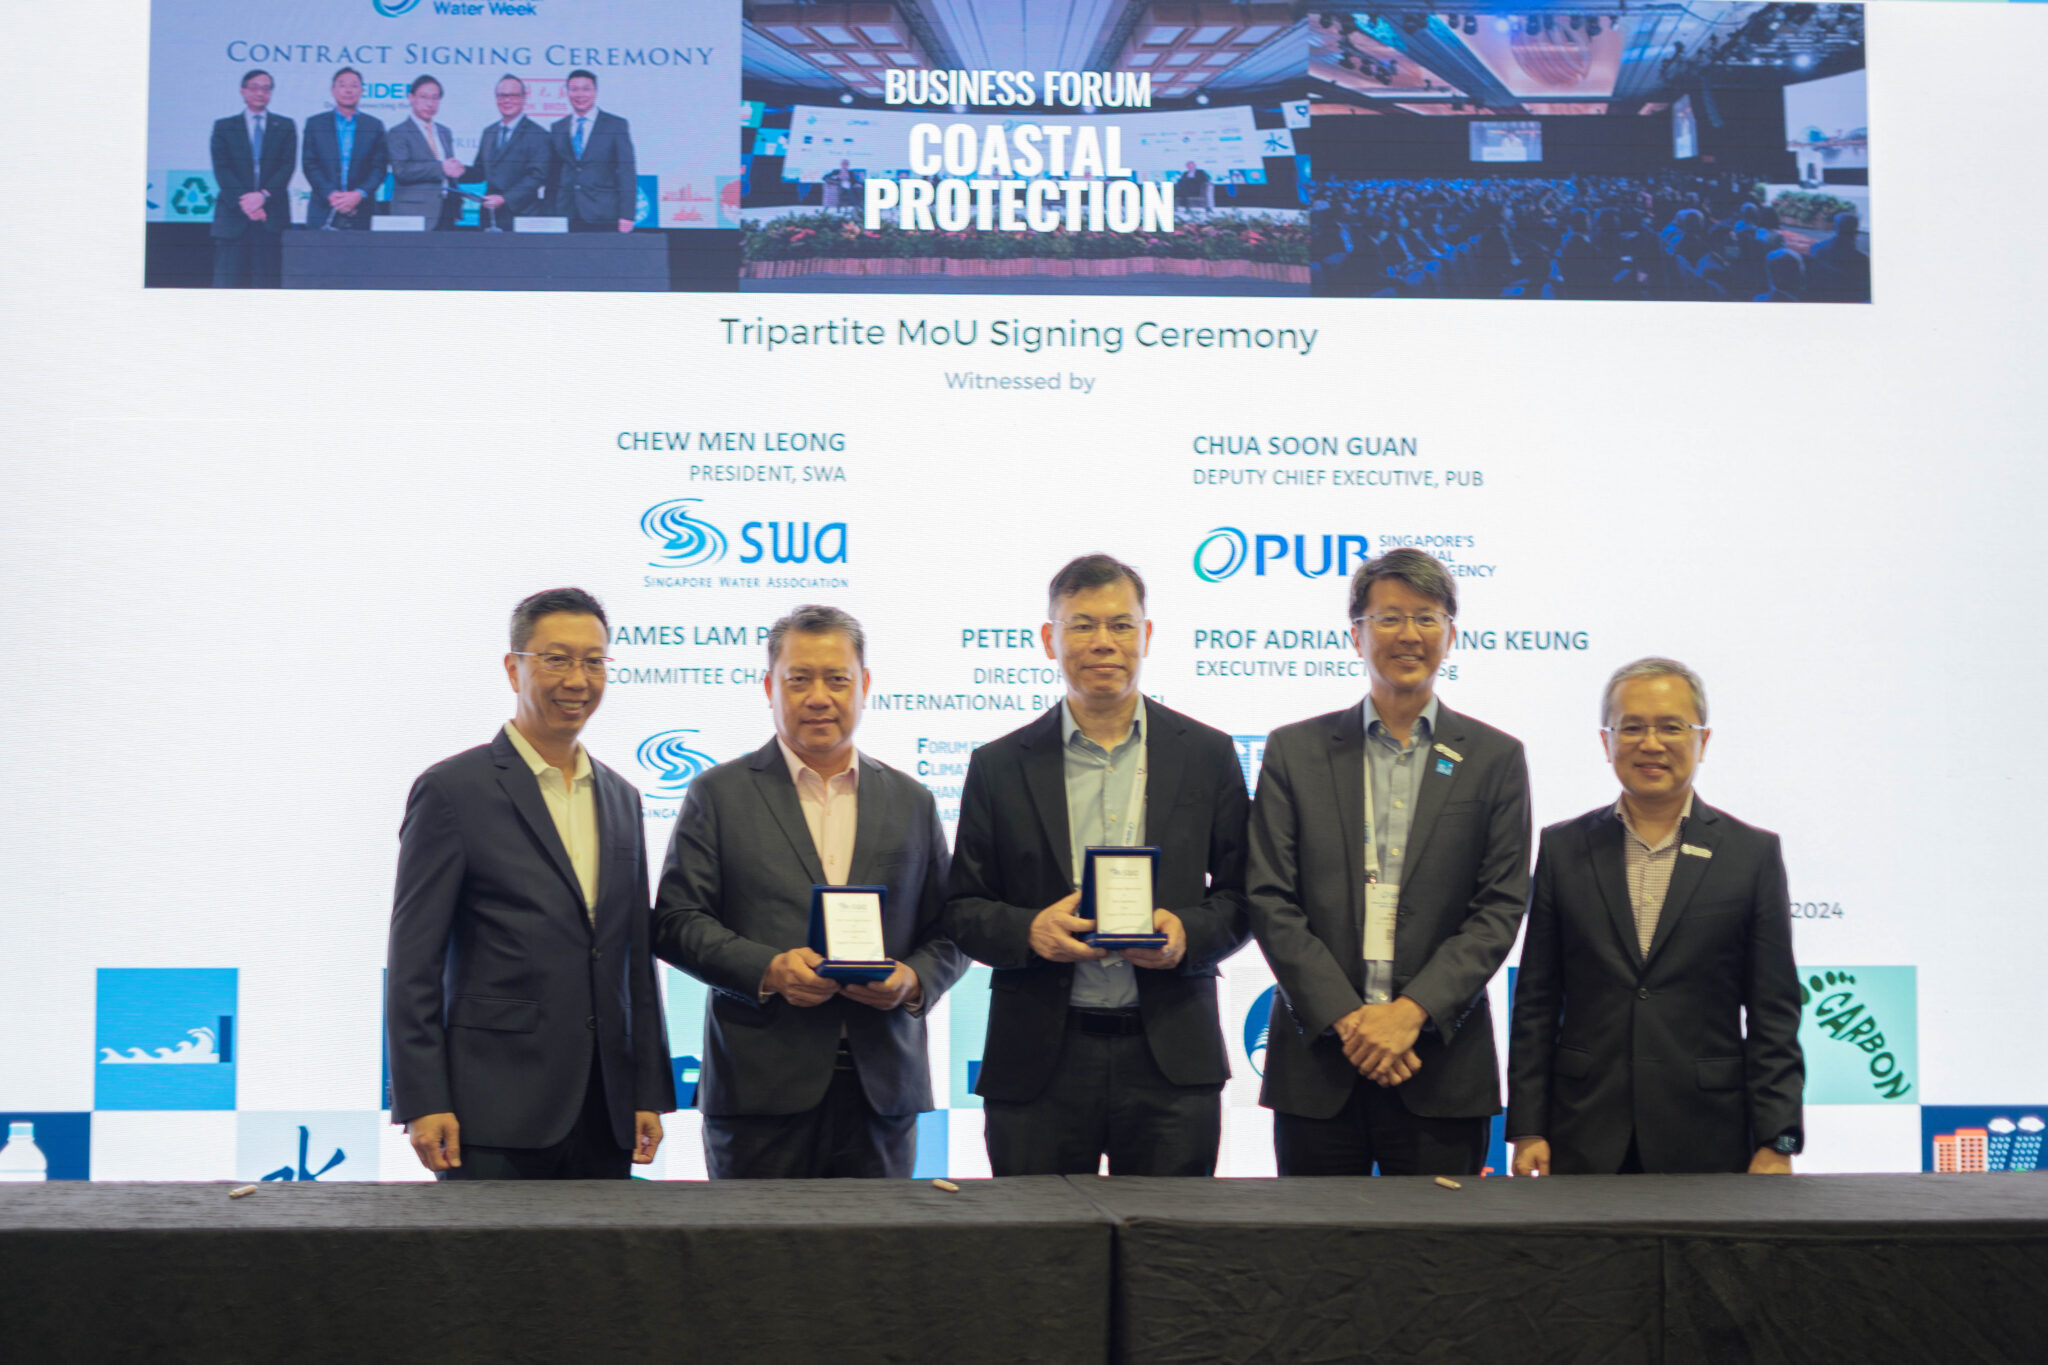 CFI Singapore signed an MOU with SWA and FCCA at the Coastal Protection Business Forum at SIWW 2024.